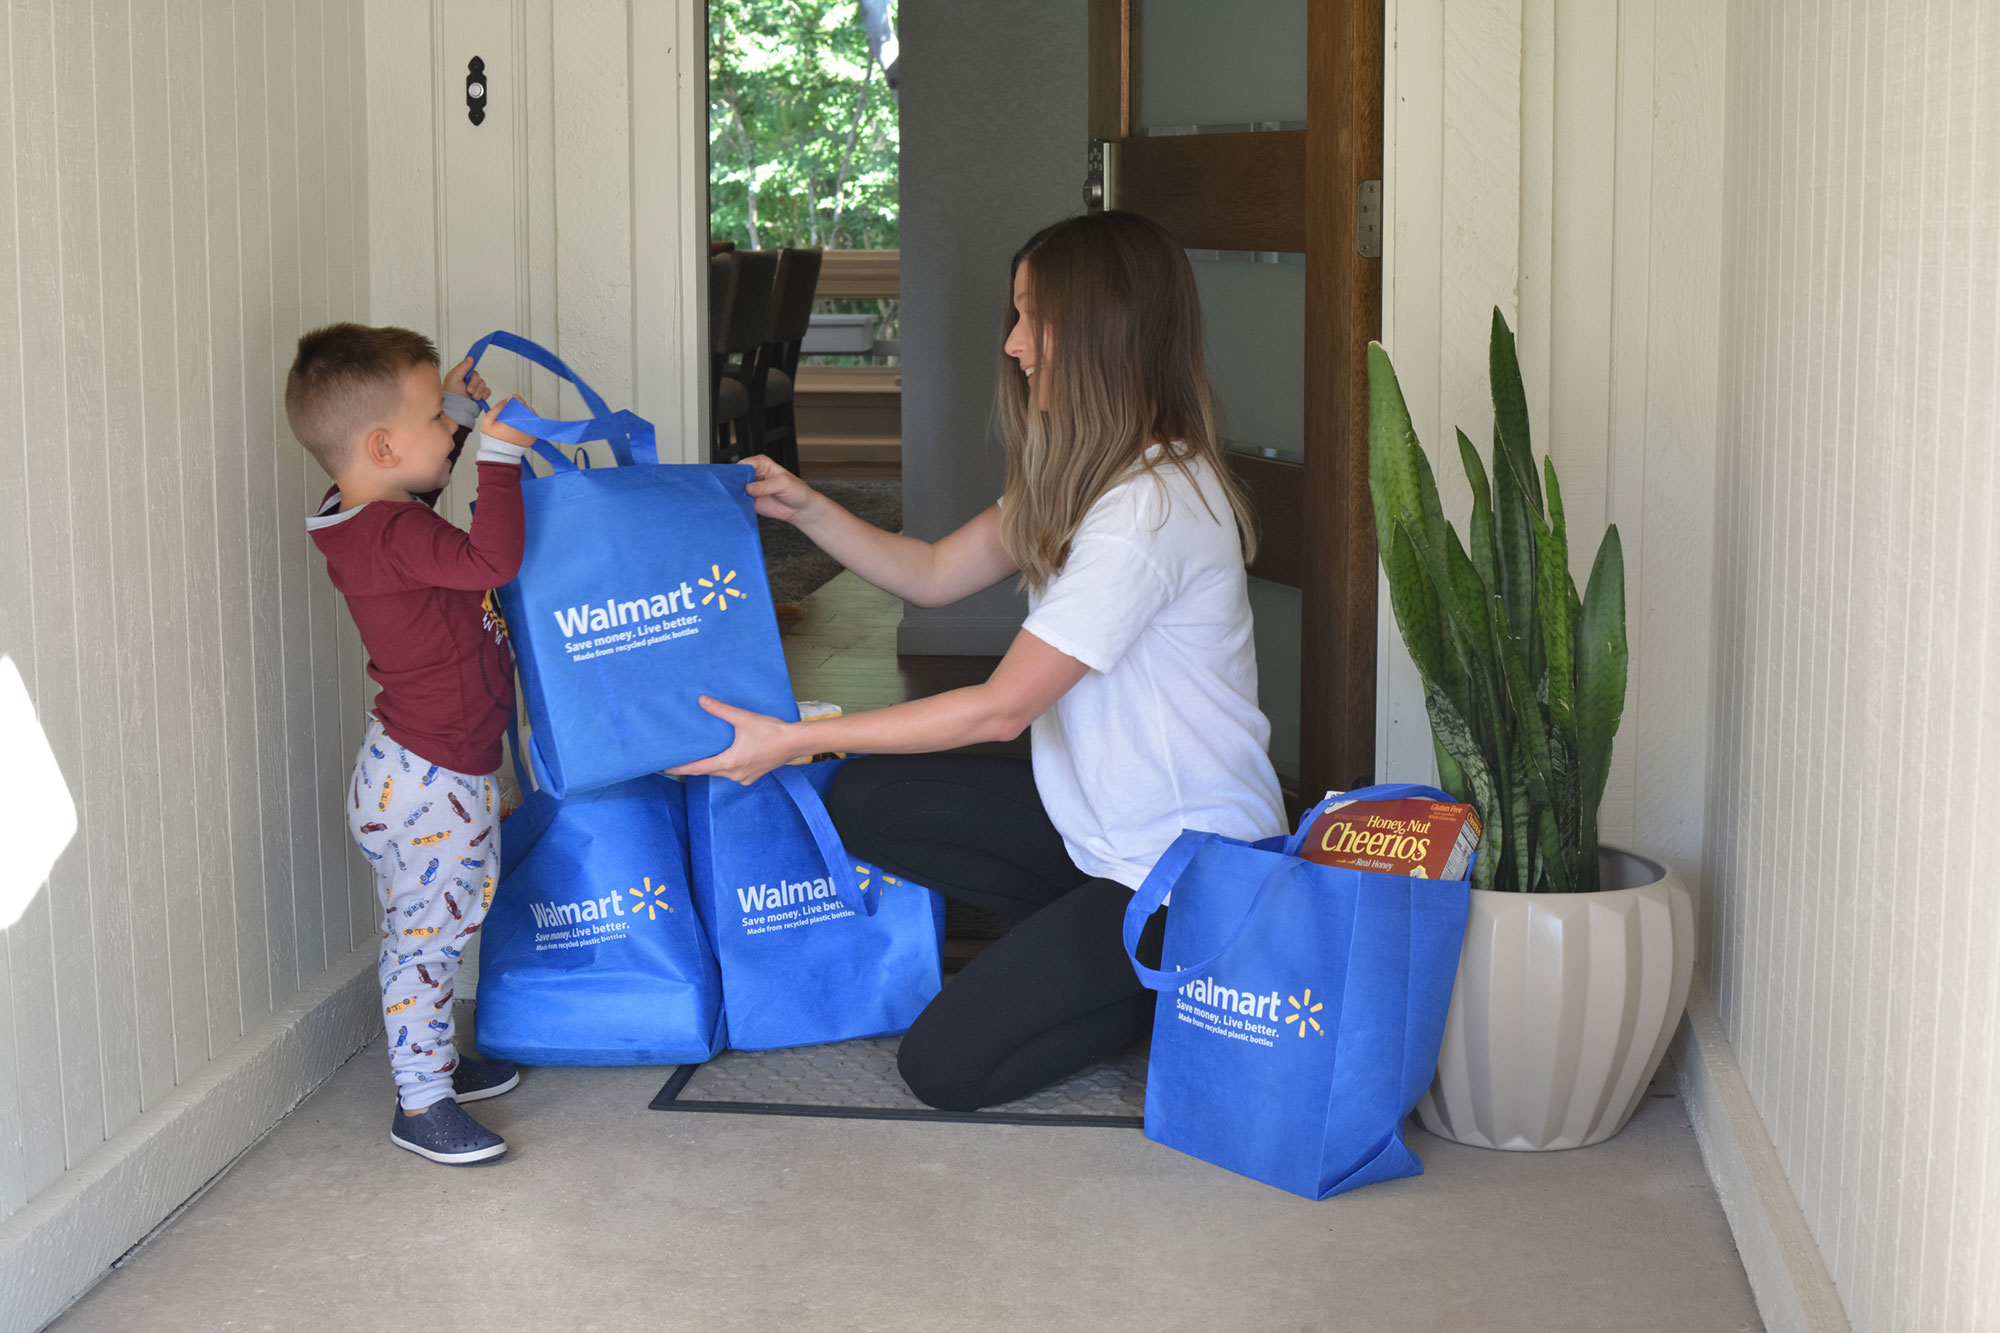 Walmart's Online Pick-Up & Delivery Service Makes Everything